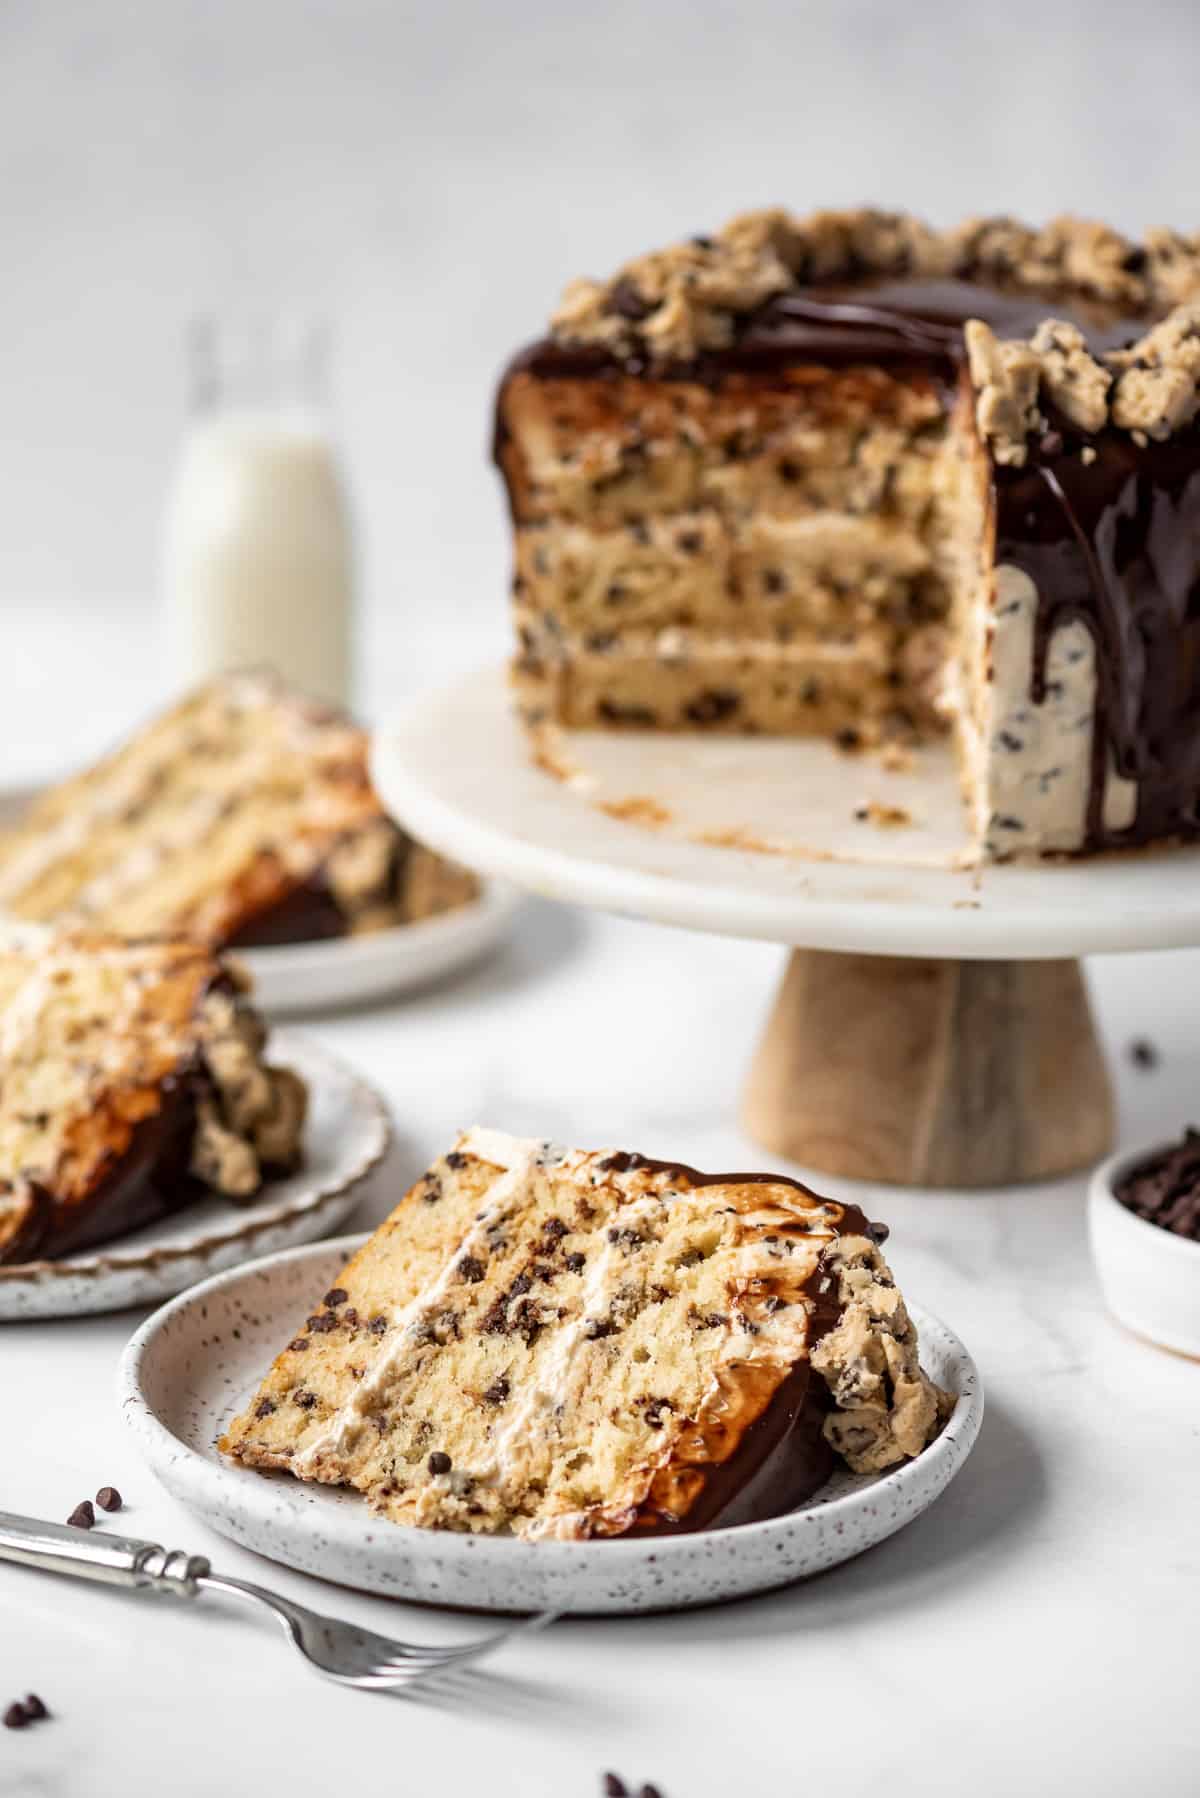 Slices of chocolate chip coookie dough cake on plates next to the rest of the cake on a cake stand.